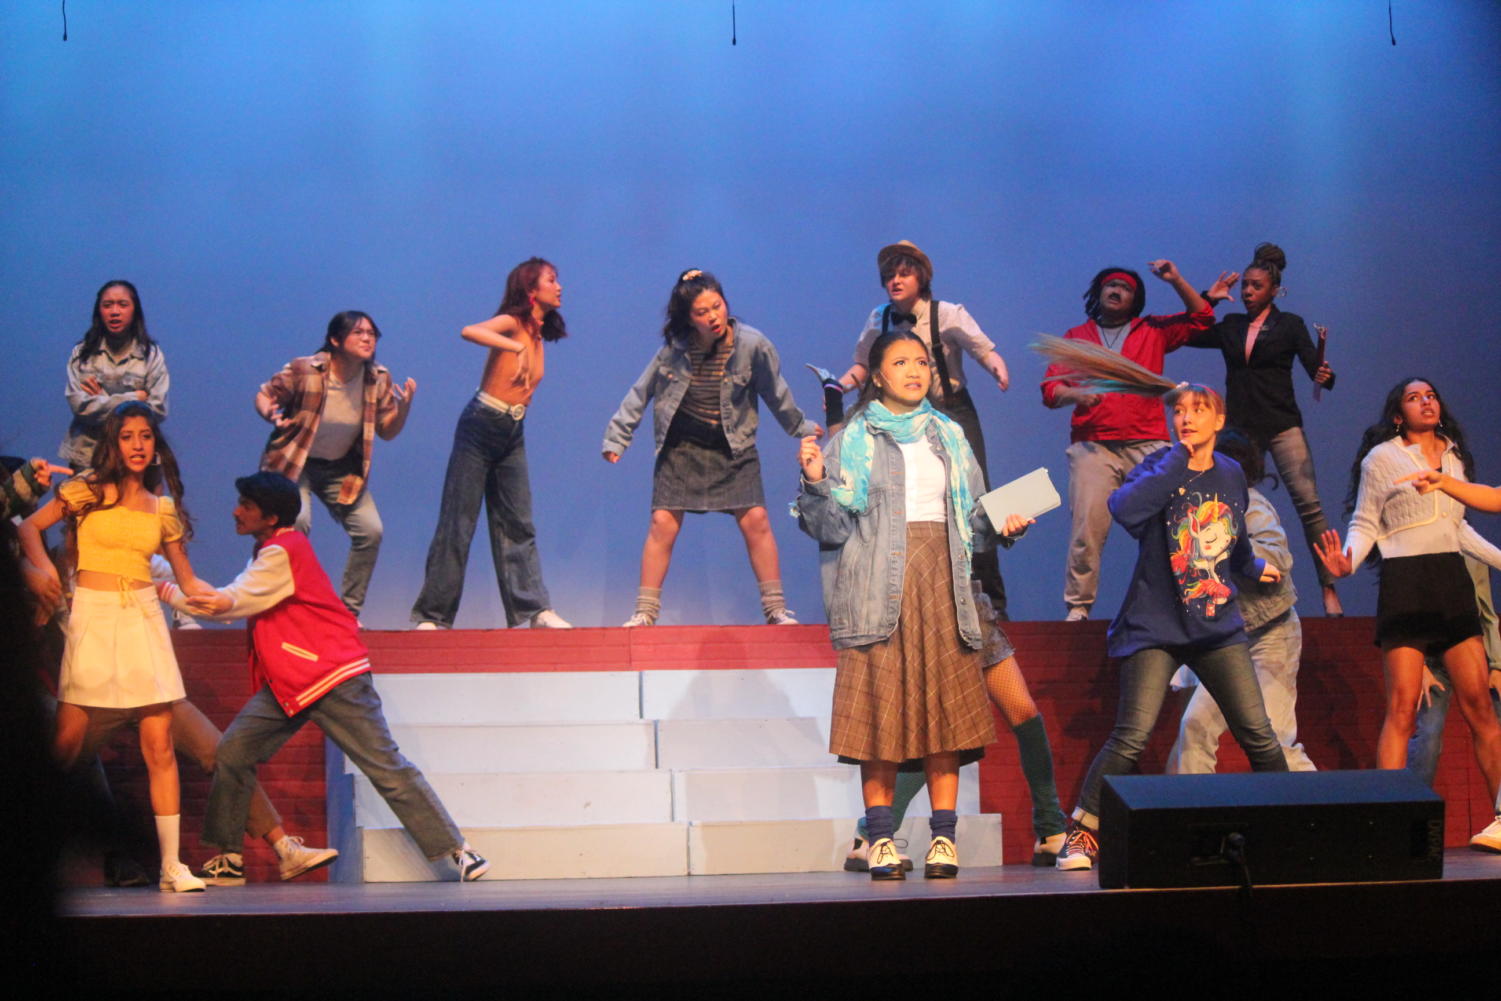 Dougherty+Valley+Drama+brings+big+fun+to+the+stage+with+%E2%80%9CHeathers%3A+The+Musical%E2%80%9D